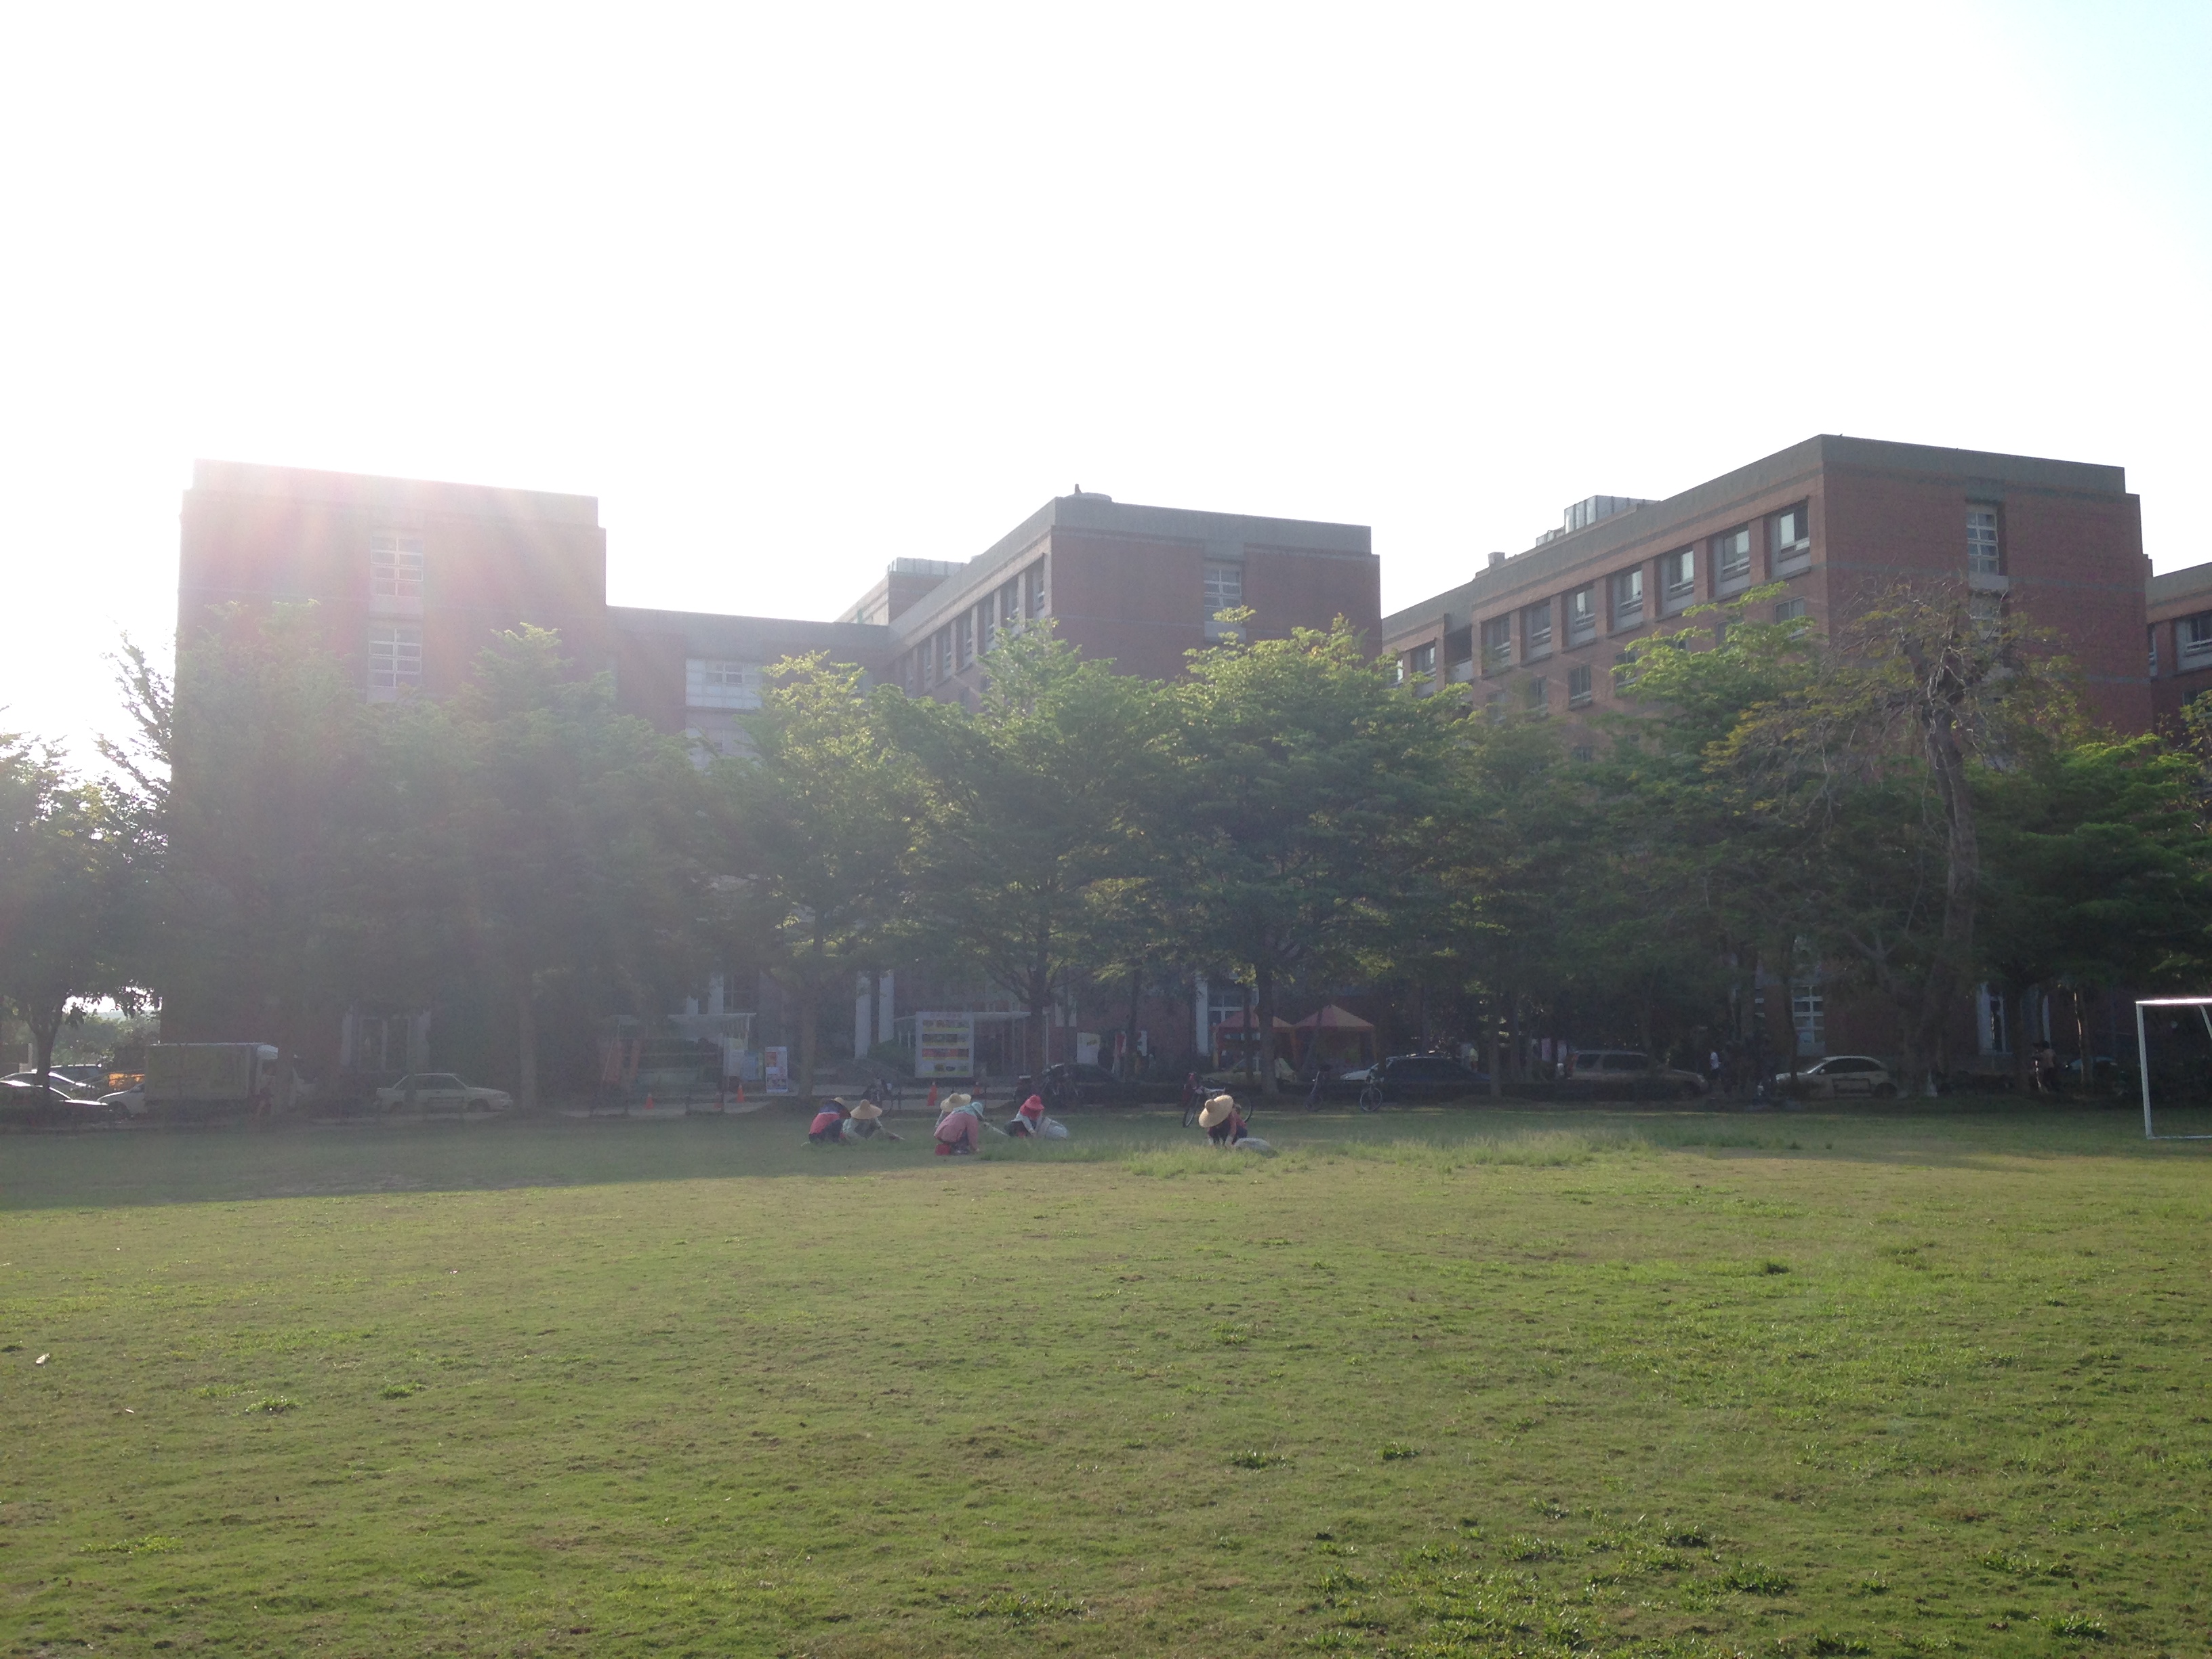 Green Field in front of Dorms